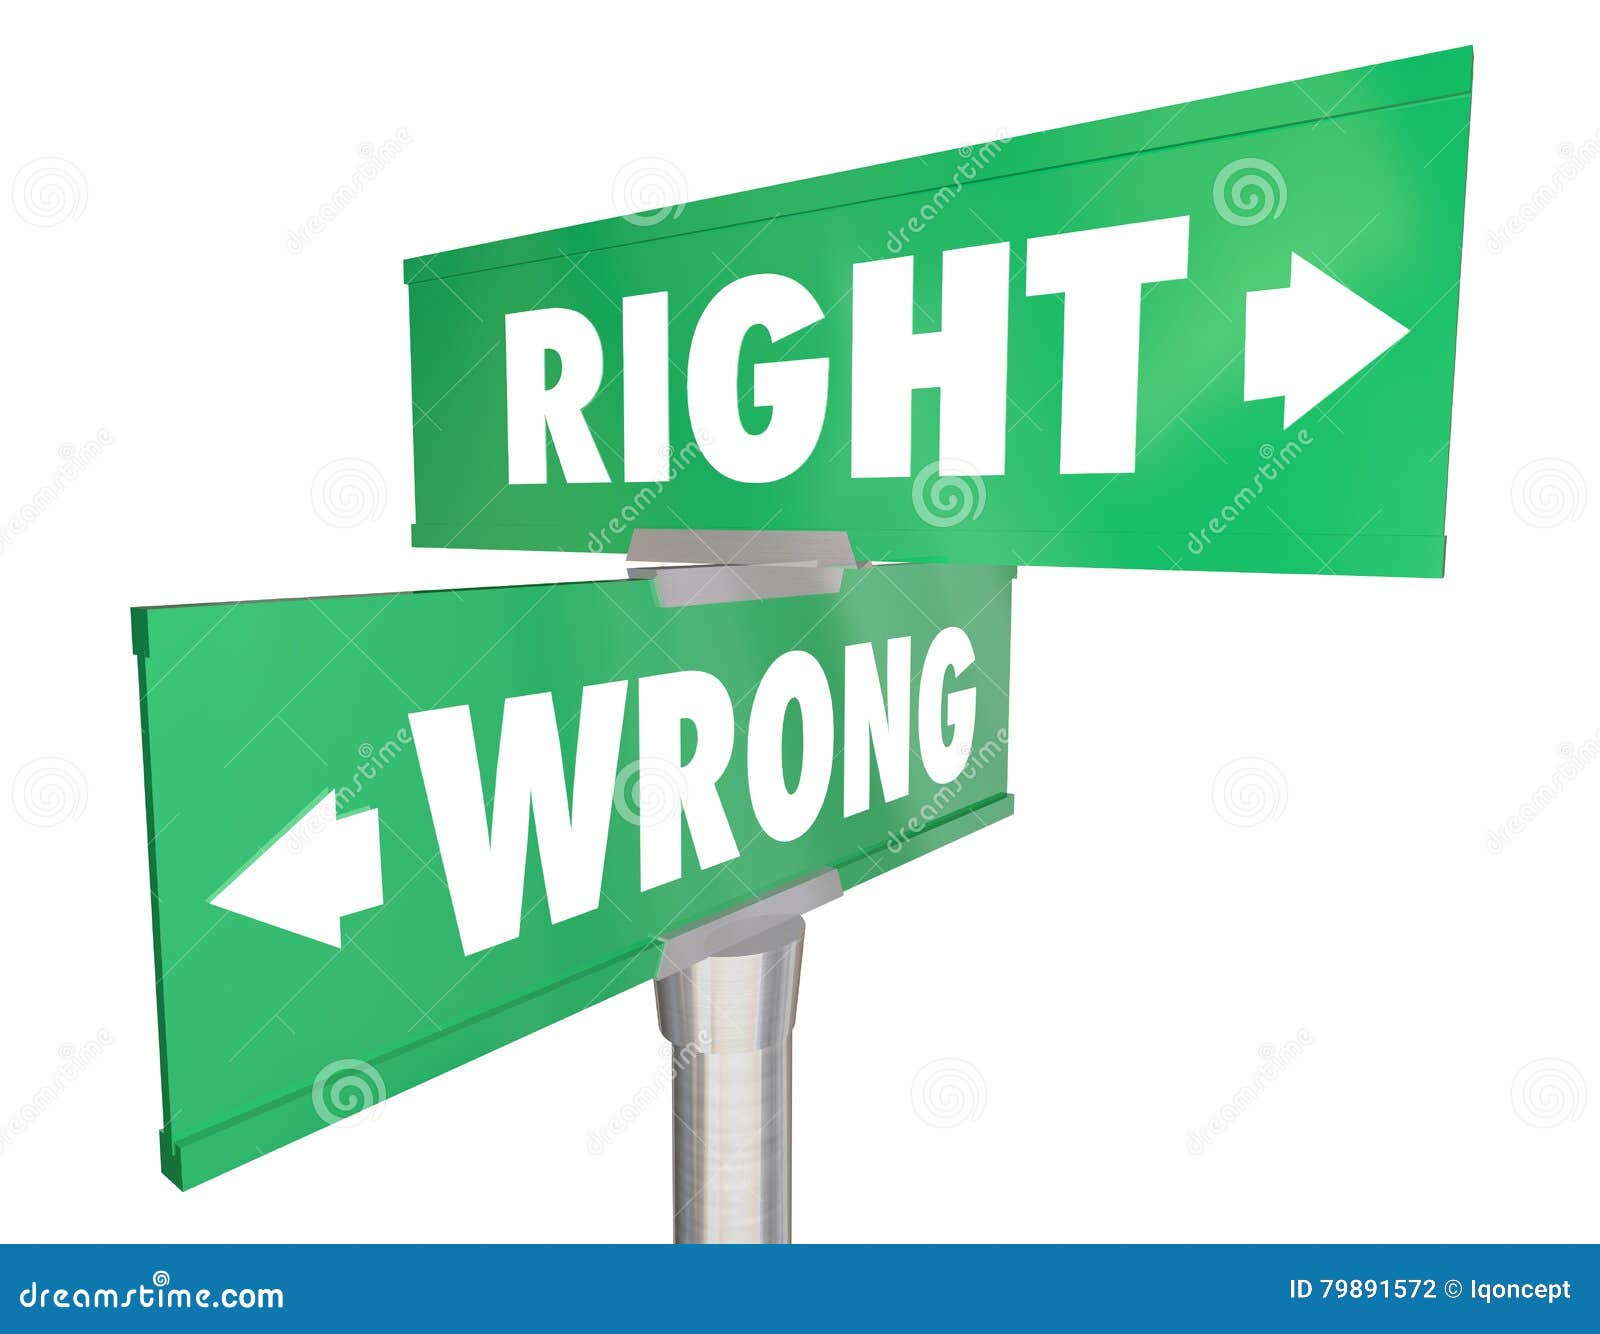 right vs wrong correct way route direction signs